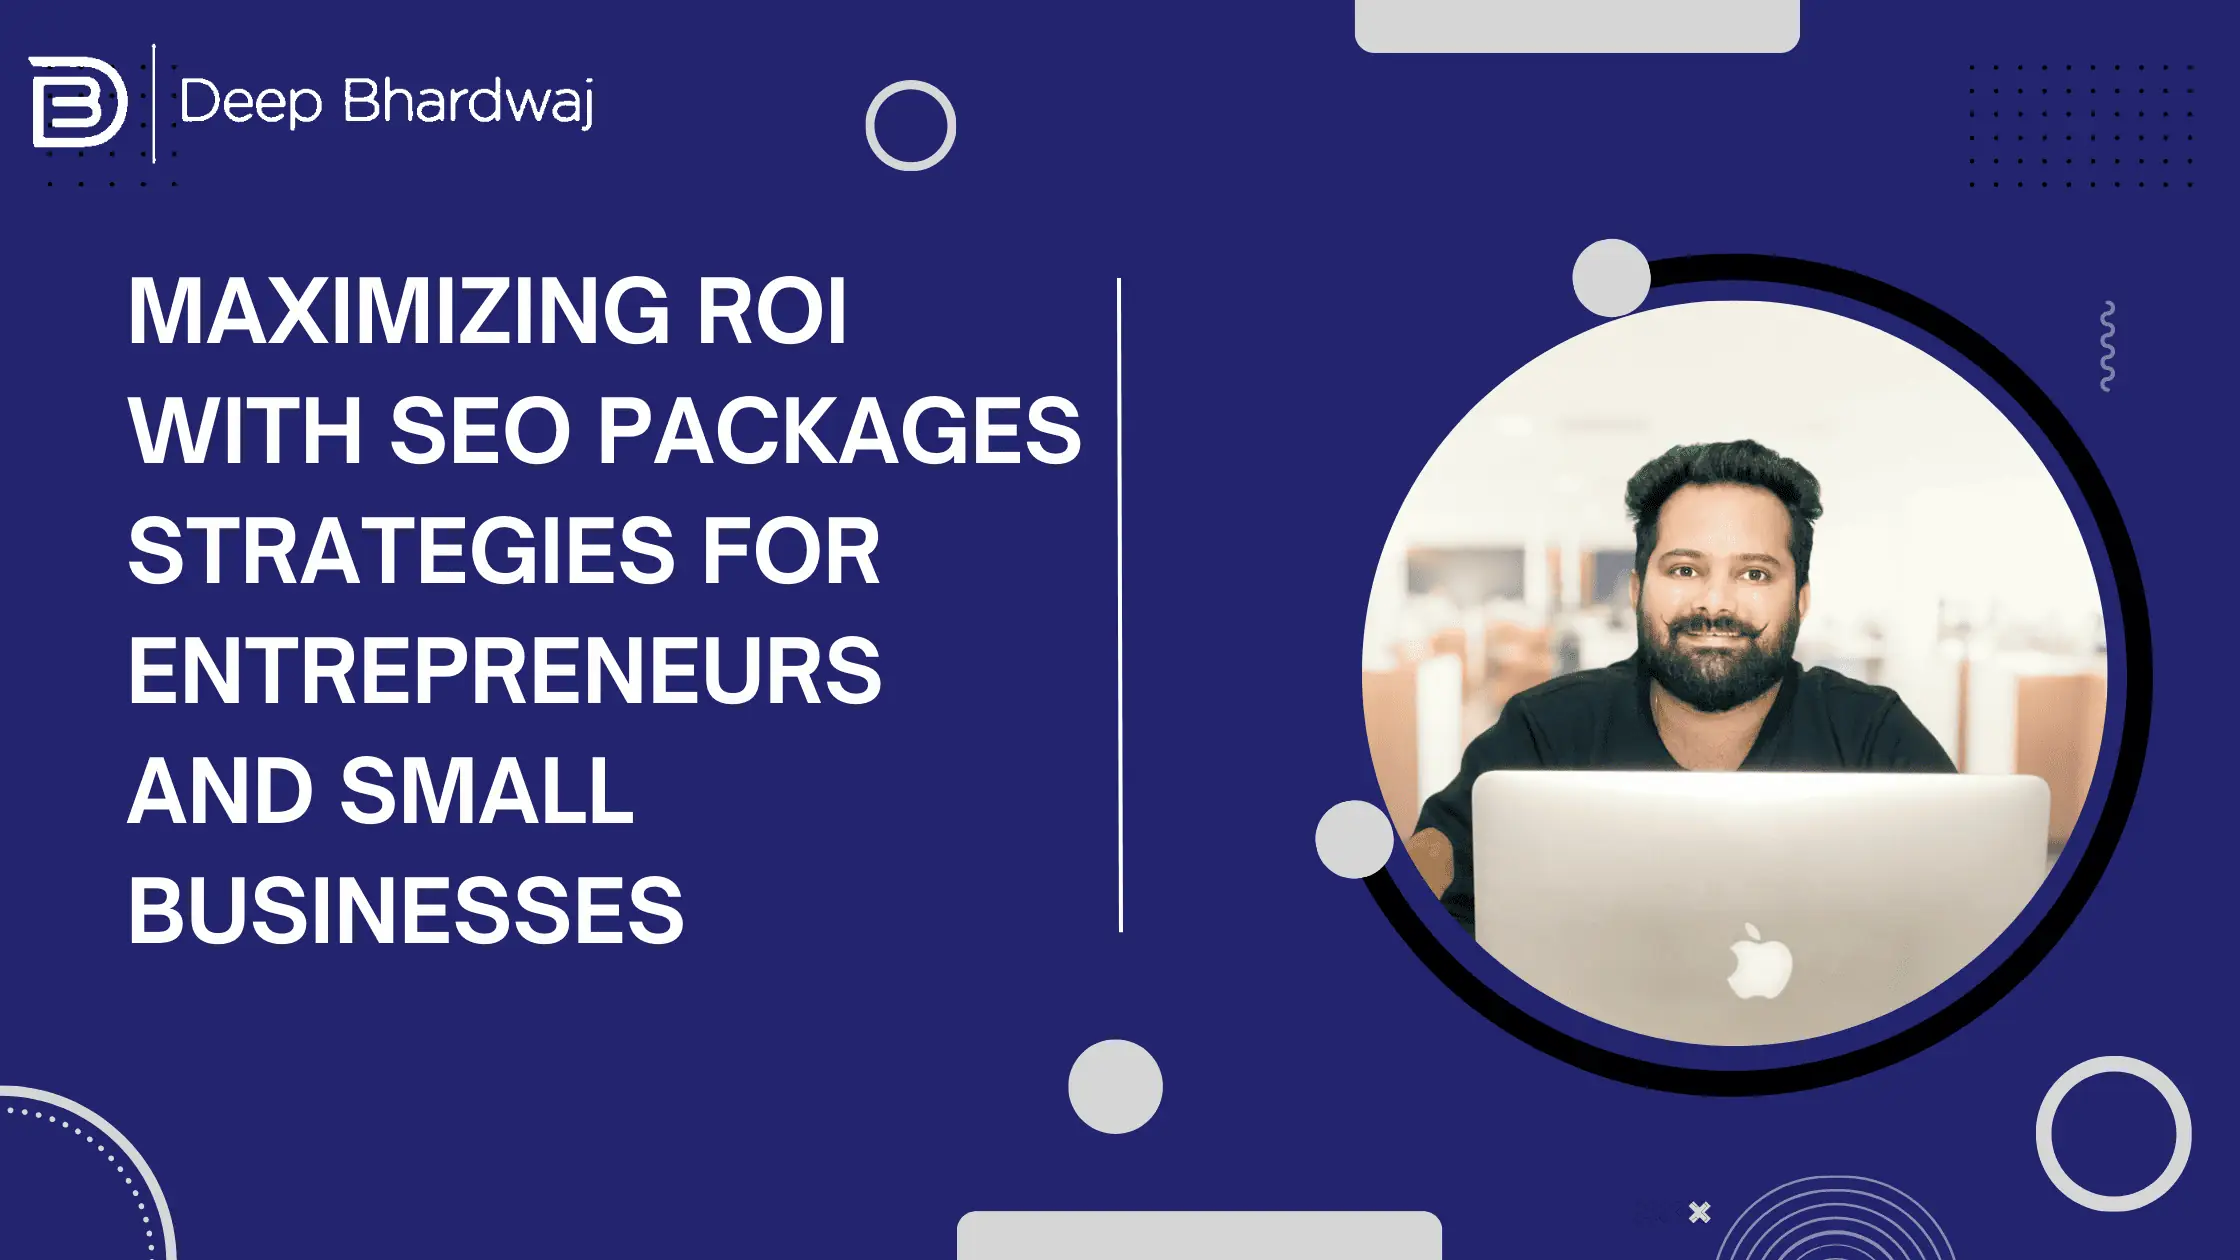 Maximizing ROI with SEO Packages Strategies for Entrepreneurs and Small Businesses